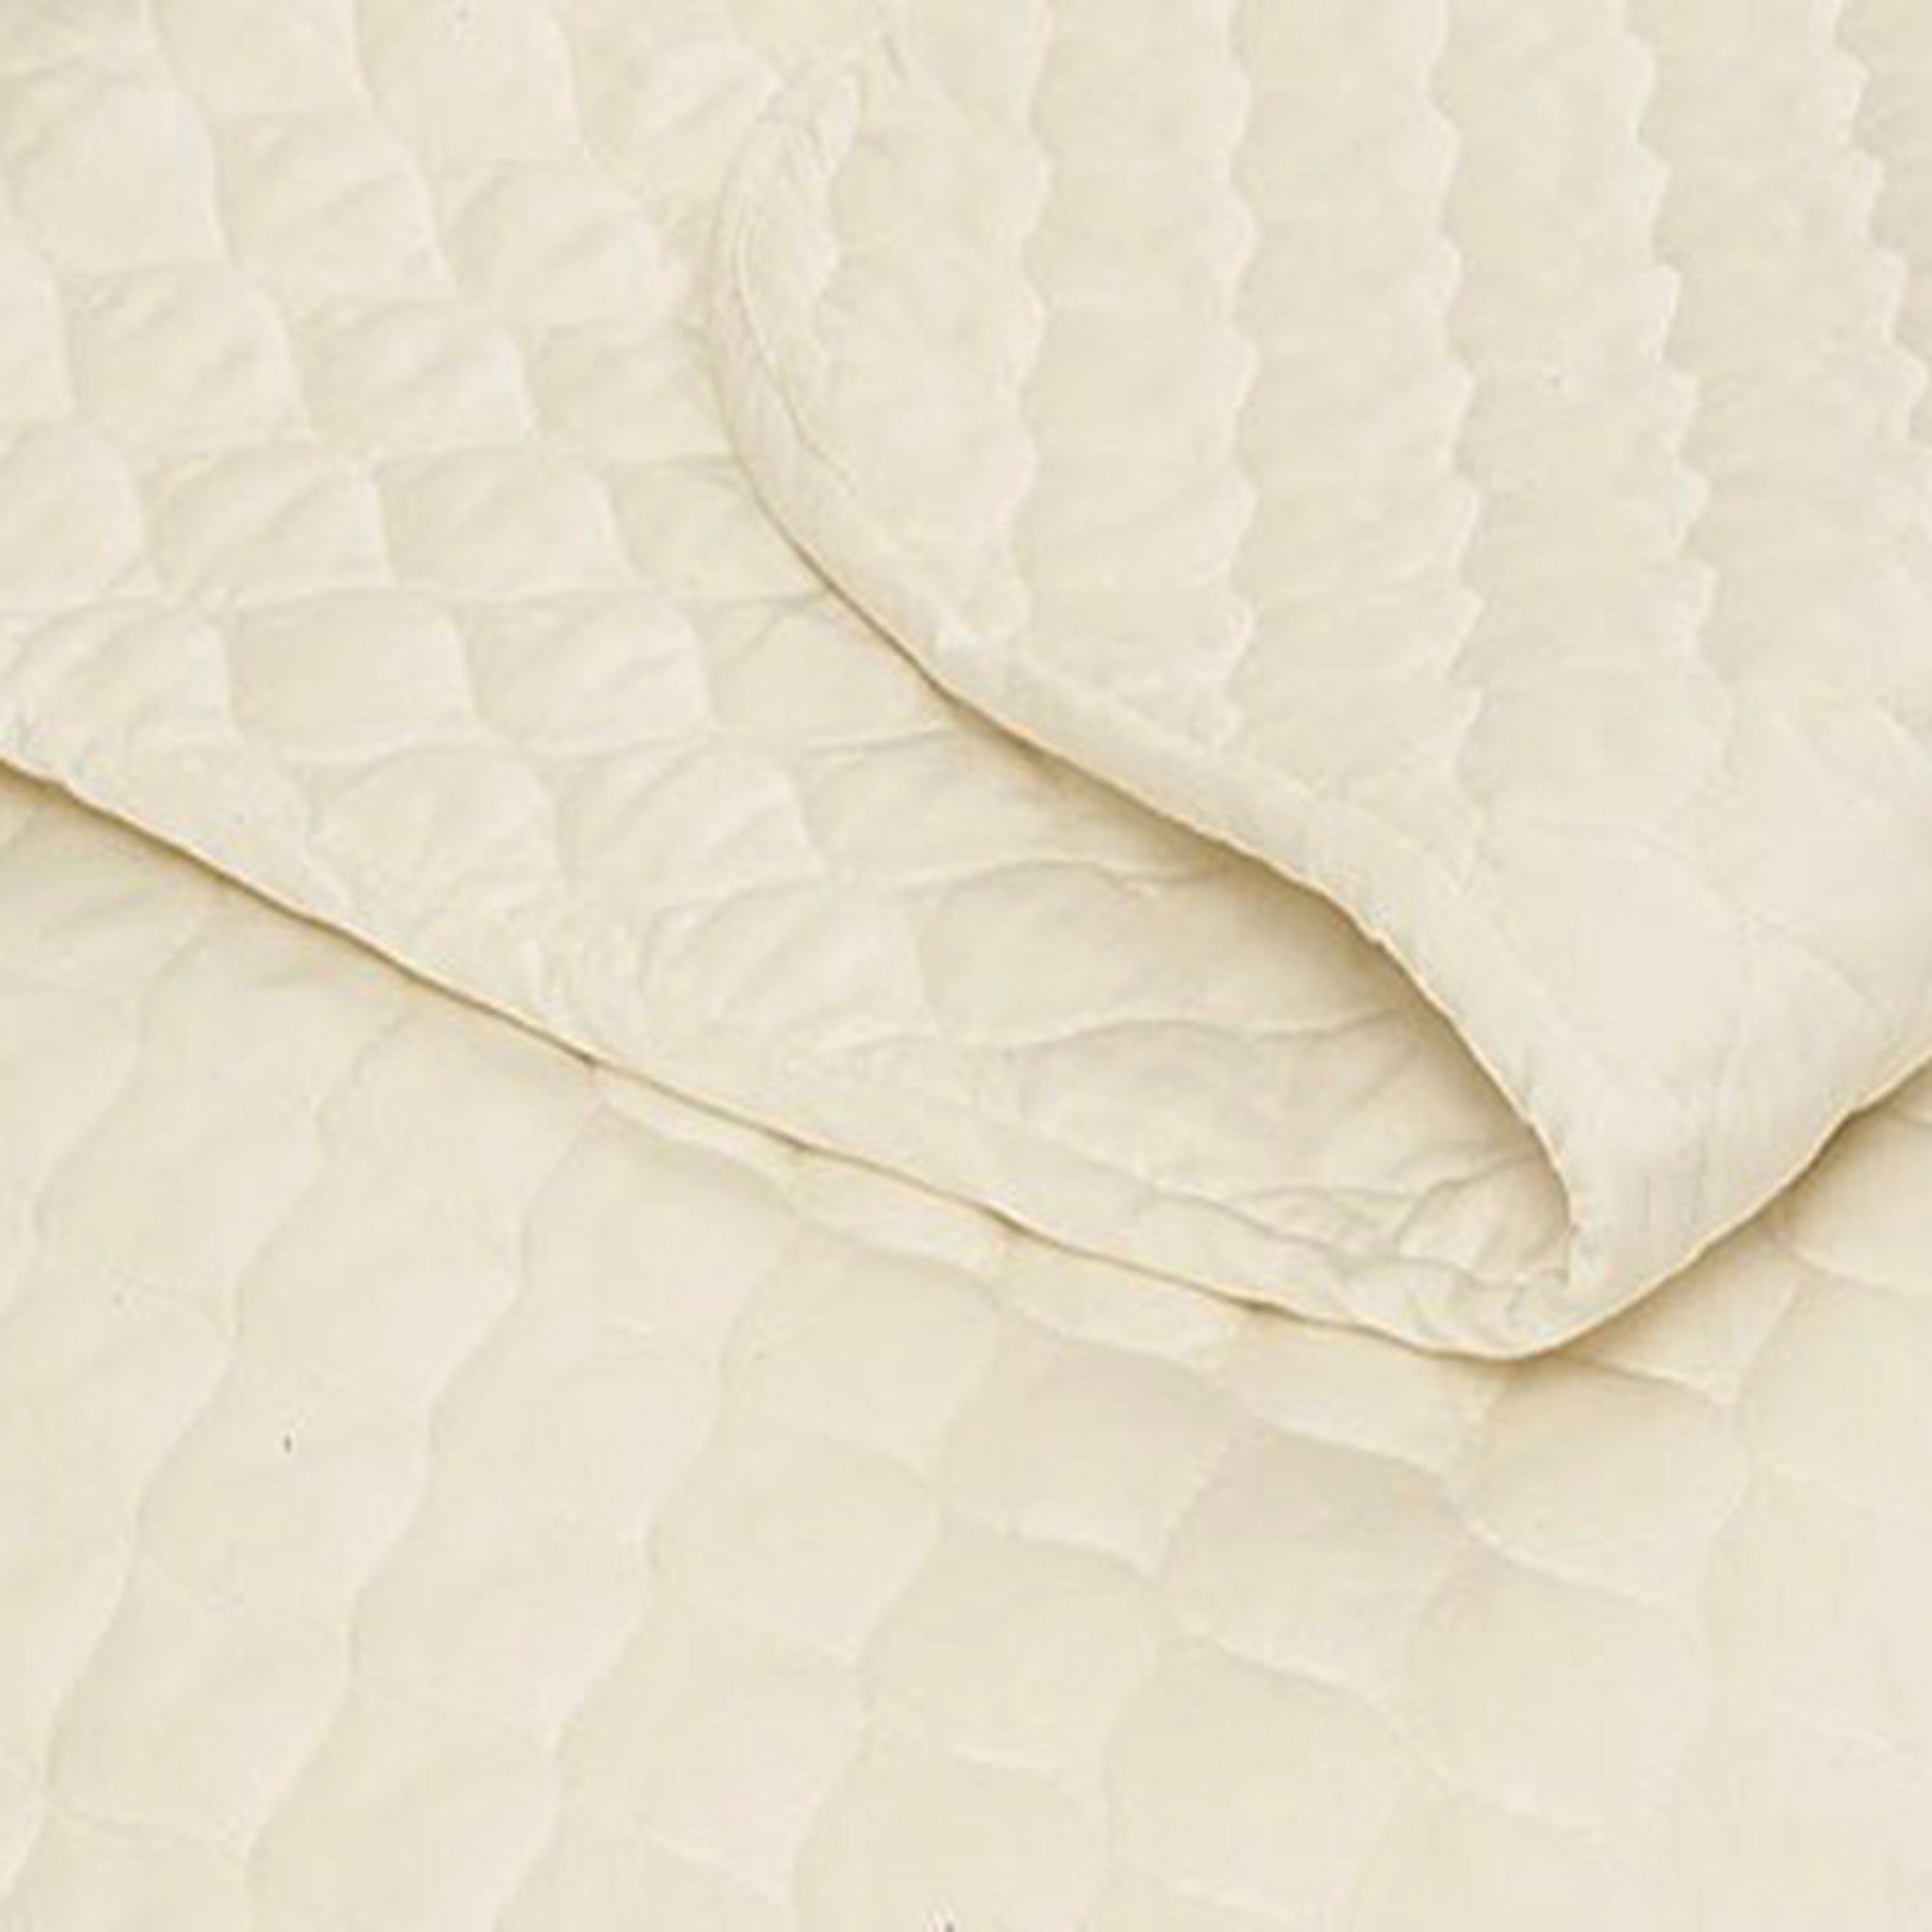 Cotton brushed padded waterproof Quilted Mattress Topper with Elastic straps